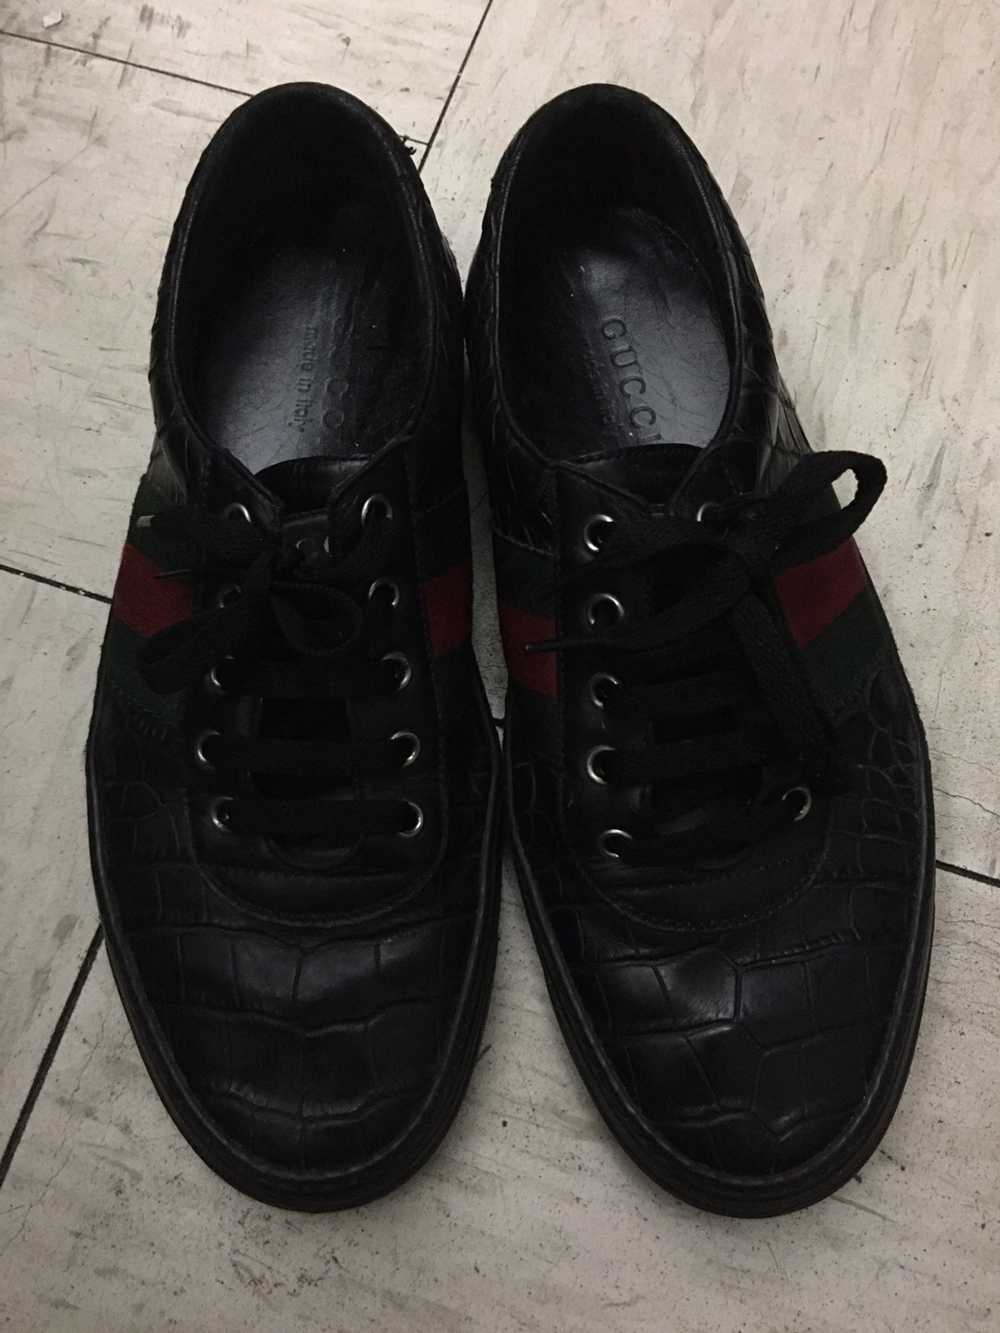 Are Gucci sneakers tacky? - Quora